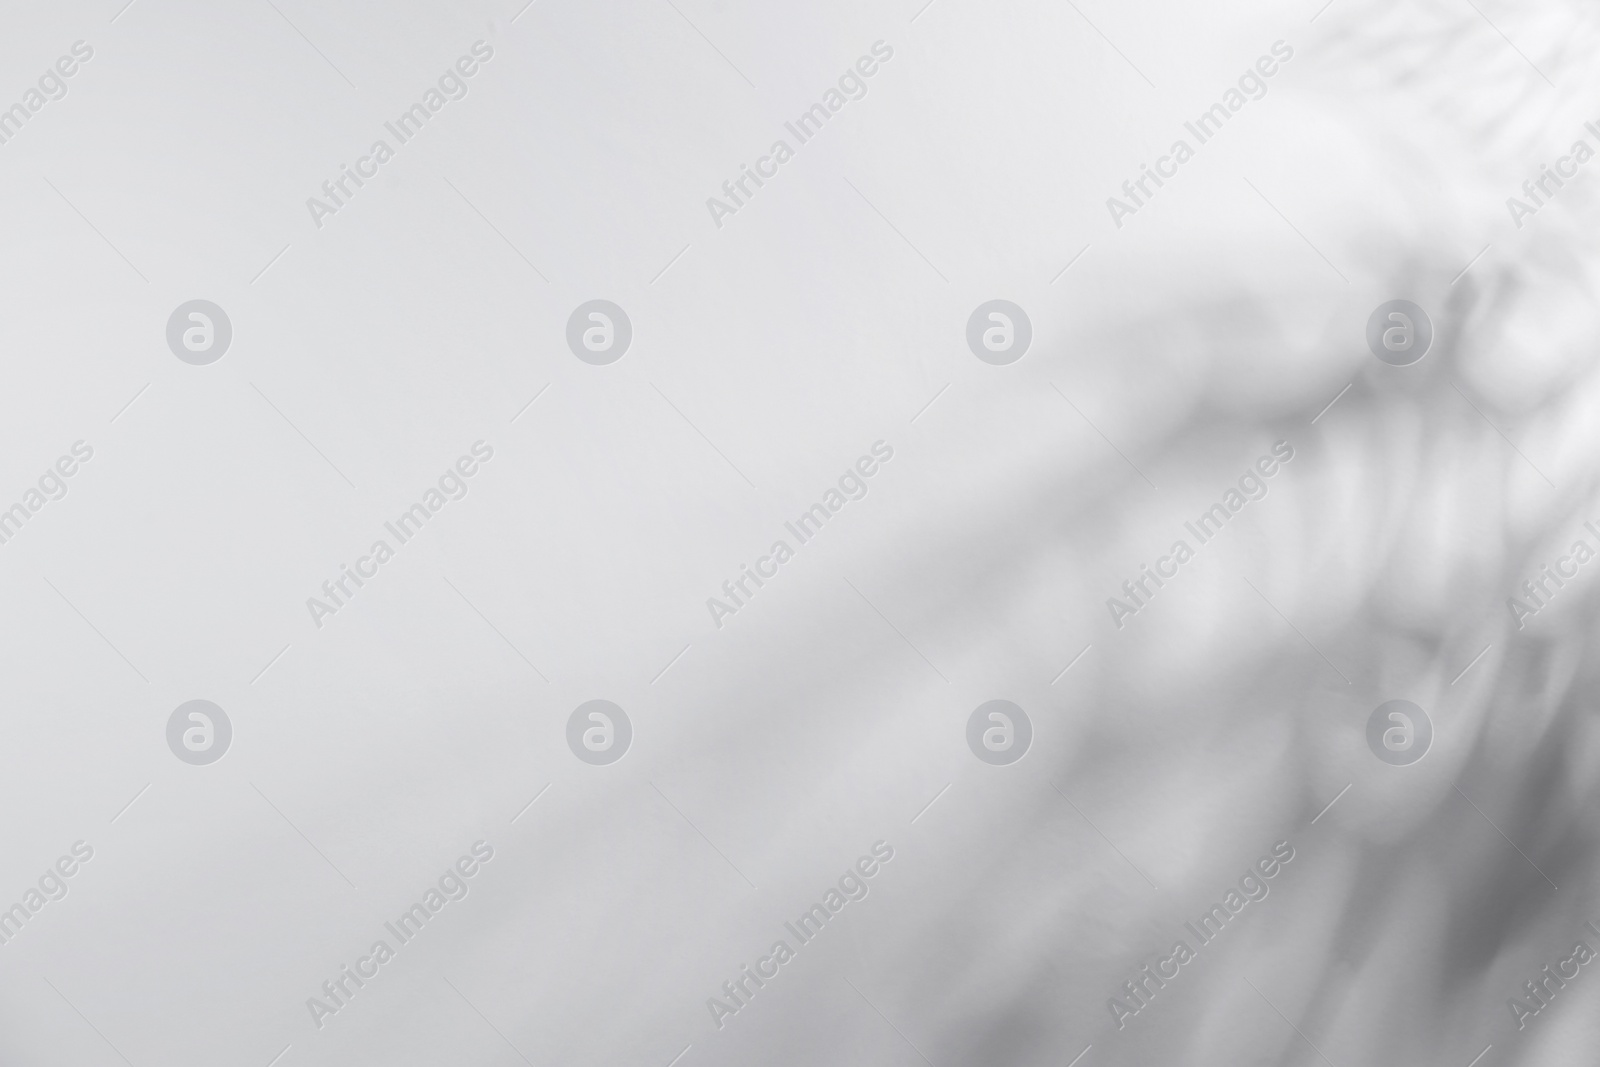 Photo of Light and shadows on white wall, space for text